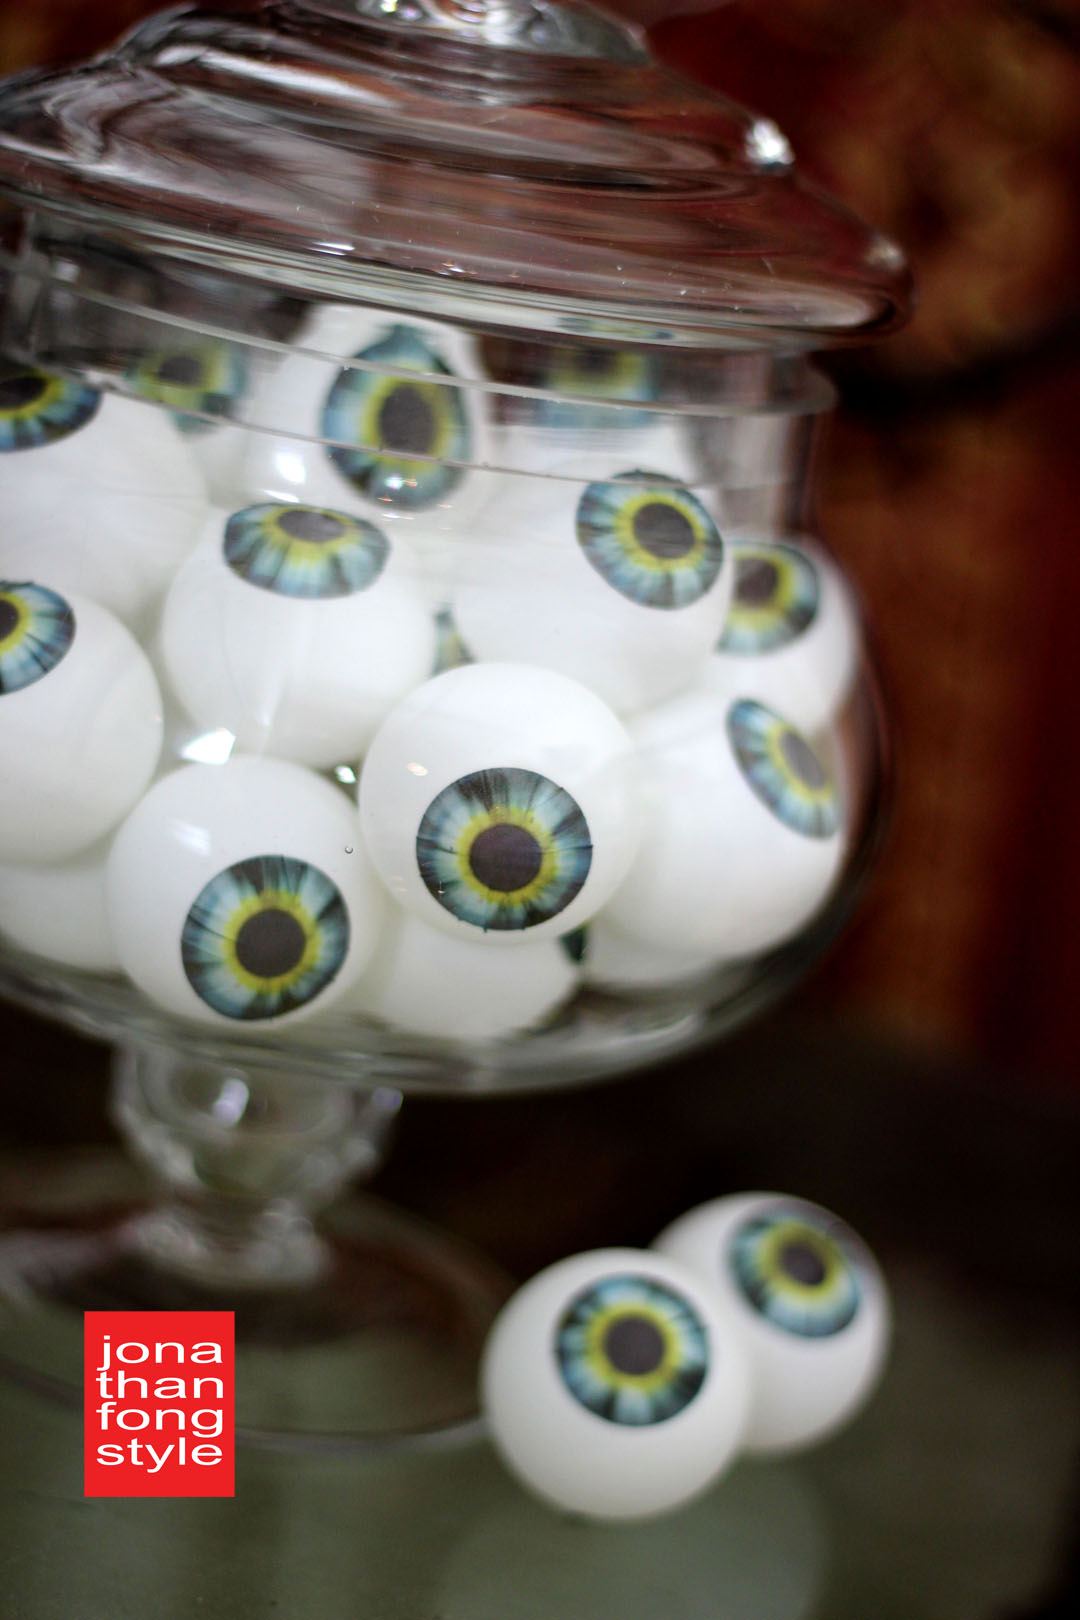 Realistic Eyeballs - created with paint, decoupage yarn fibers applied to  ping pong balls -…